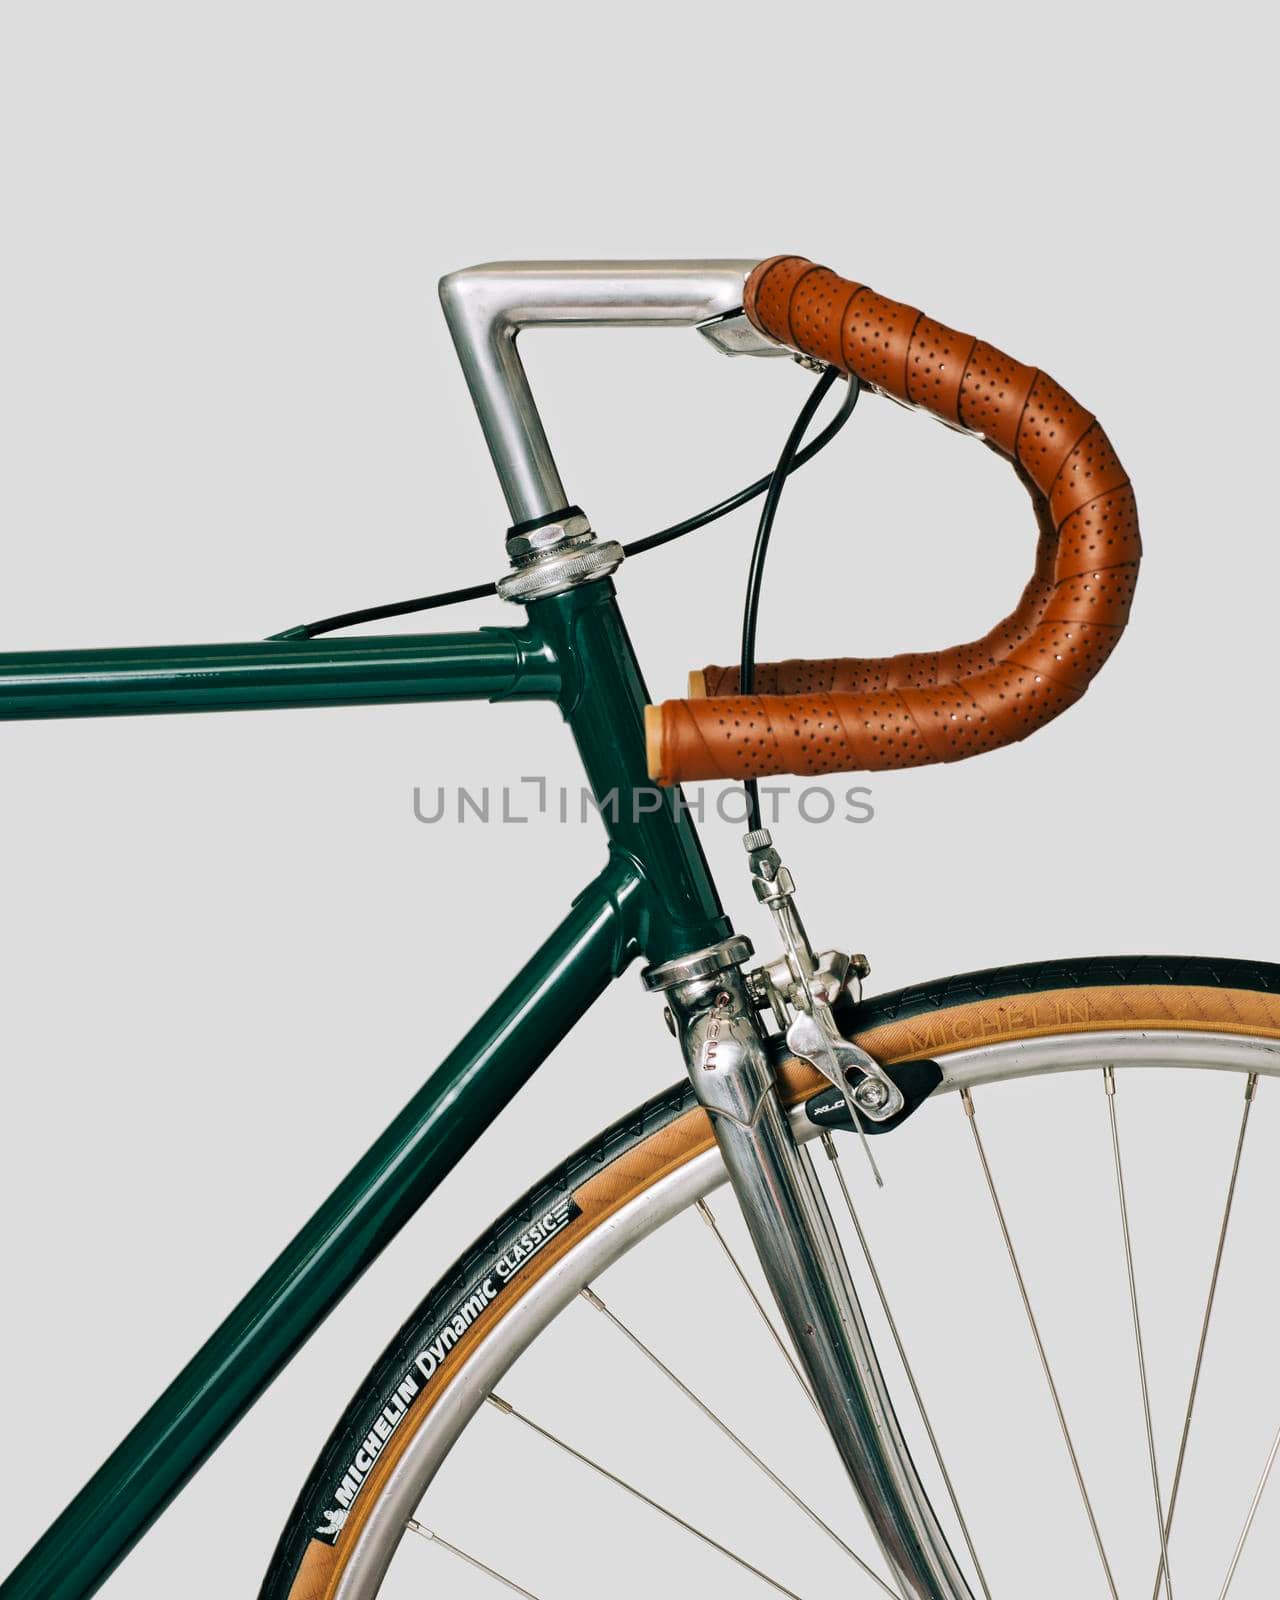 Vintage classic bicycle, with leather tape and saddle. White background. High quality photo